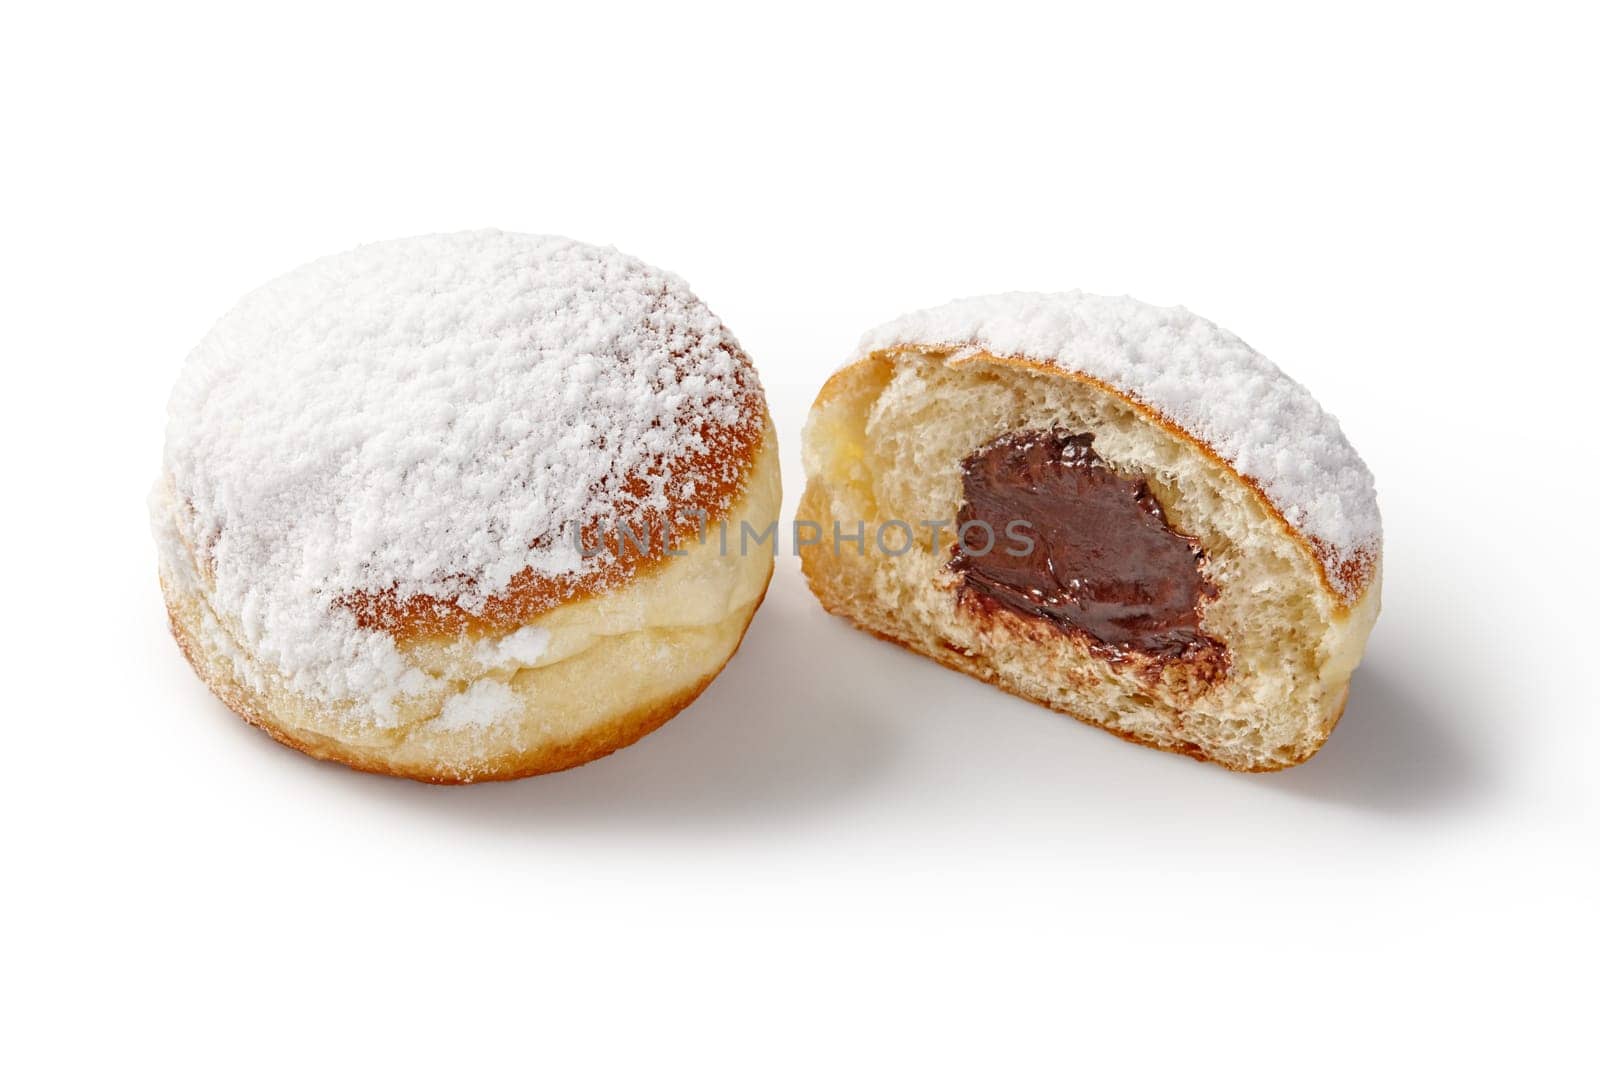 Appetizing soft airy doughnuts with sweet chocolate filling, sprinkled with white powdered sugar. Popular confectionery